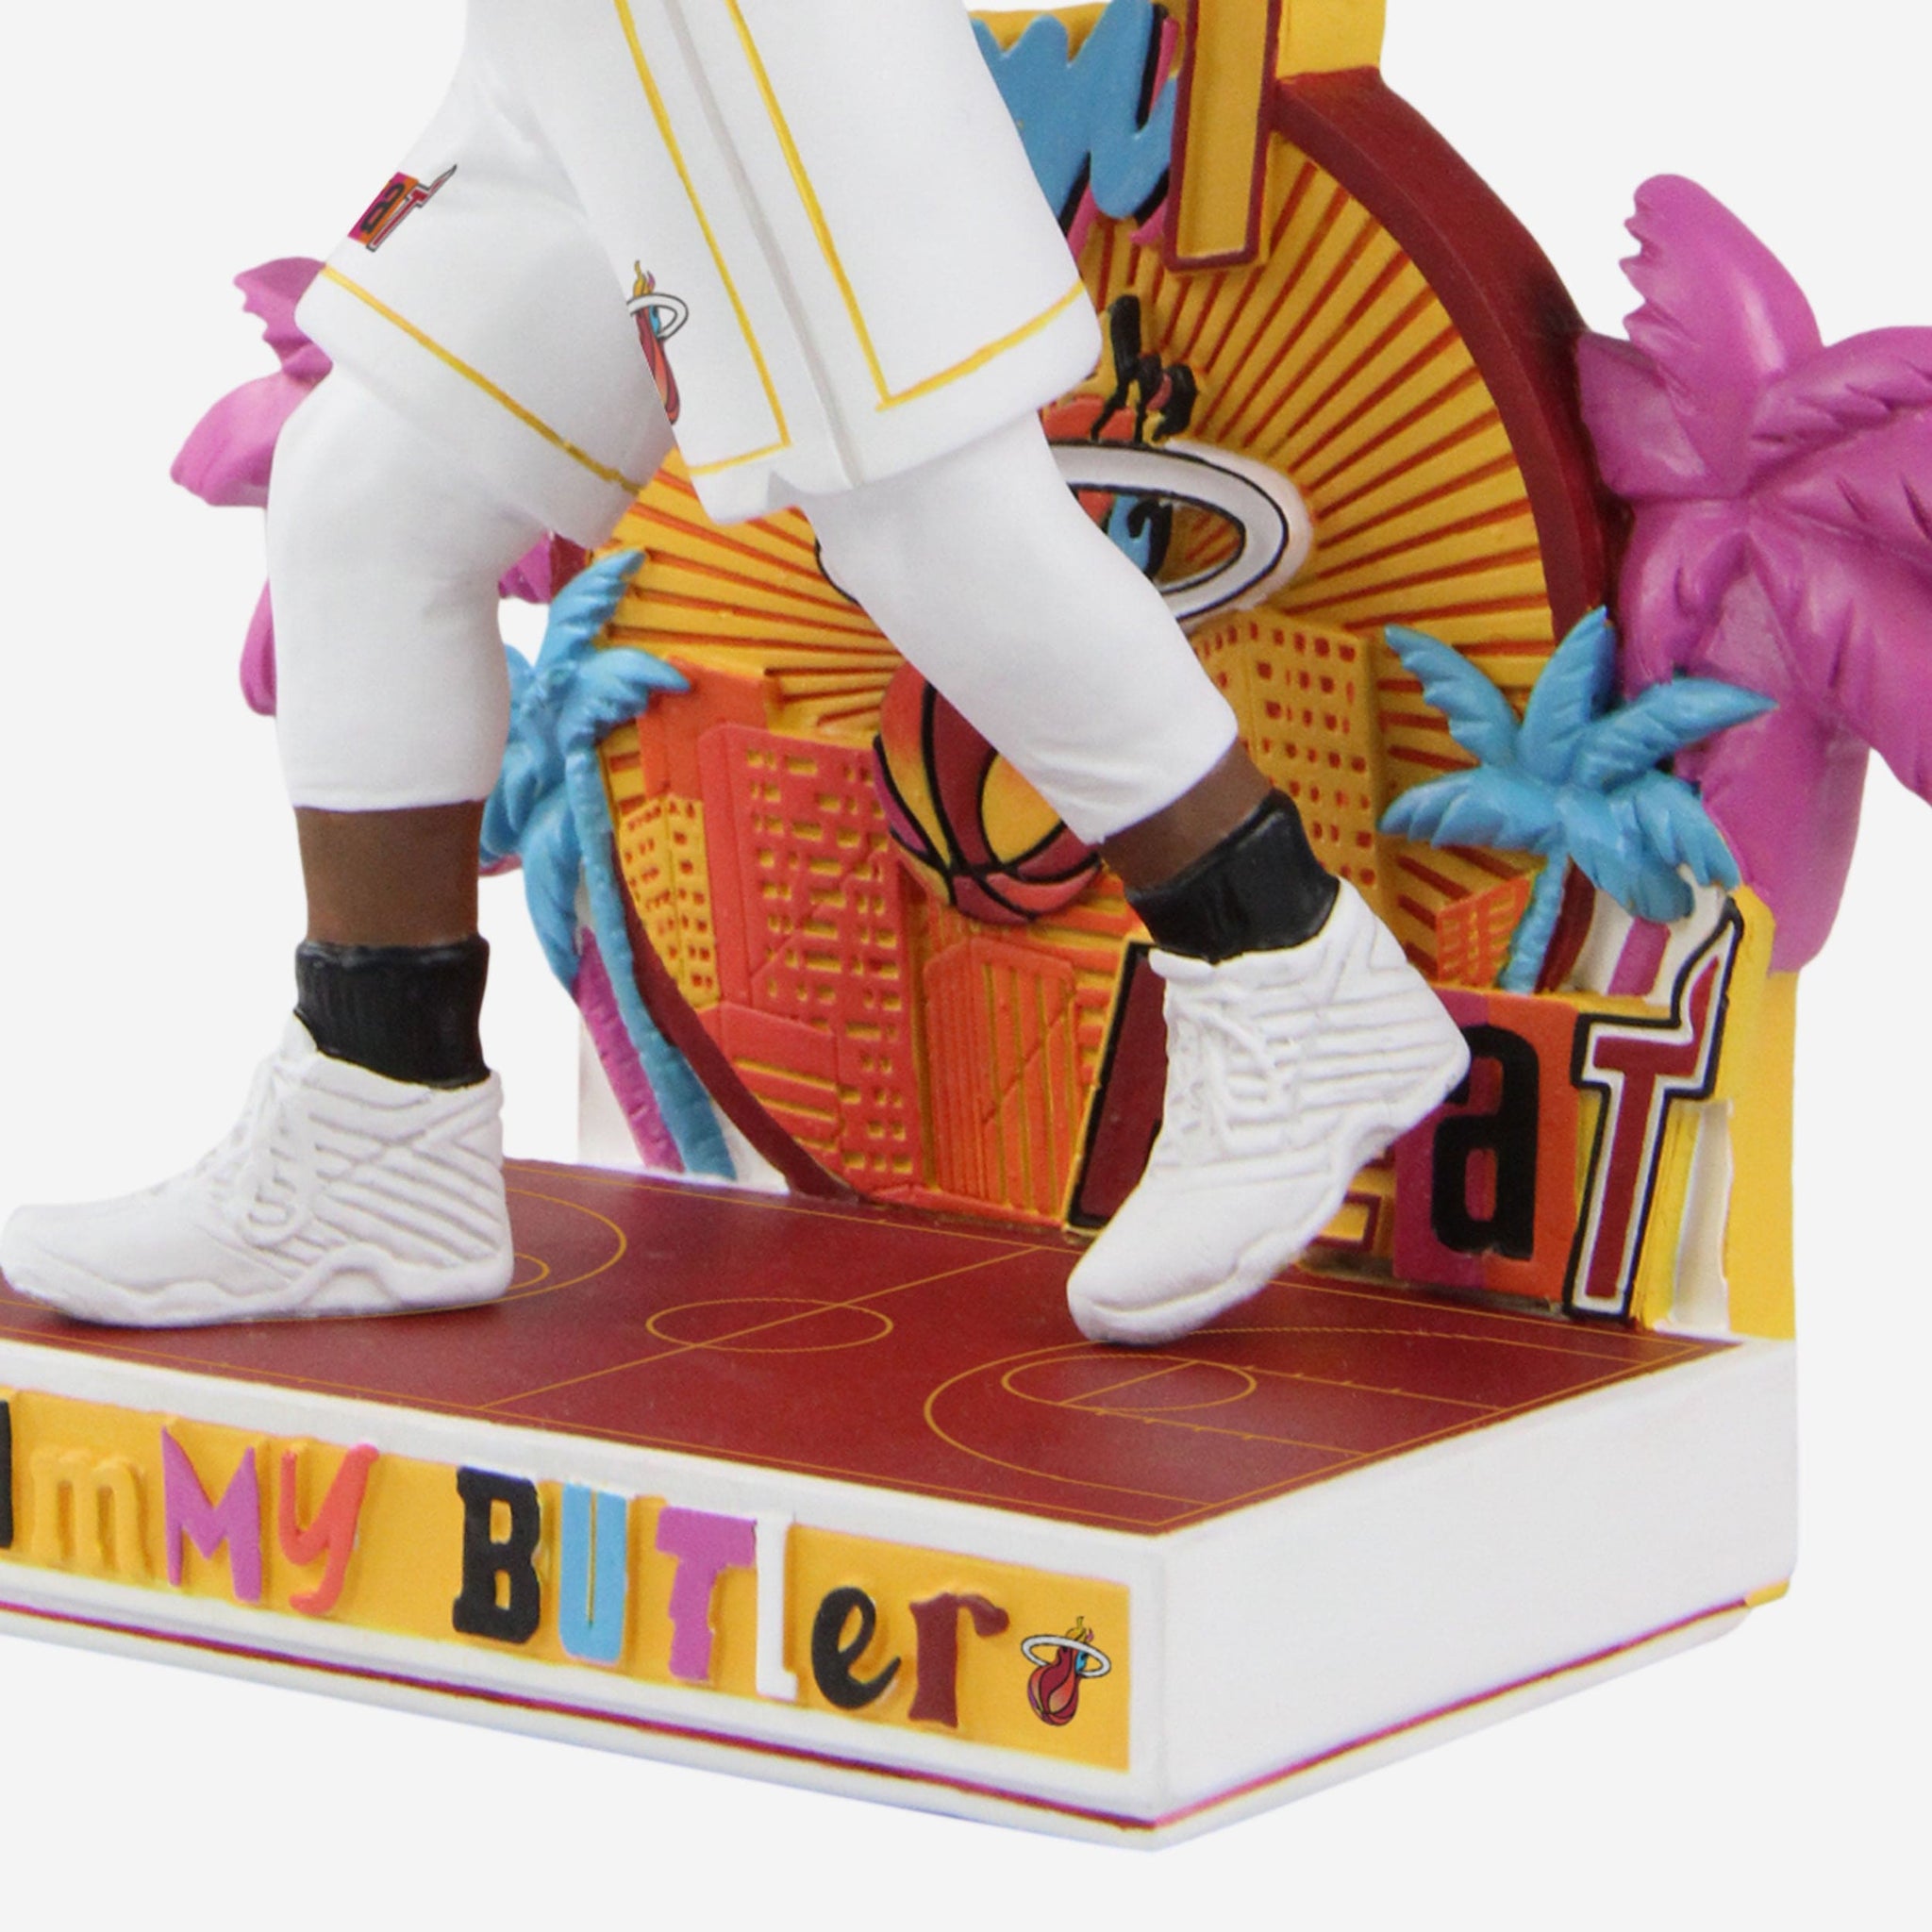 Miami Heat Jimmy Butler City Edition Jersey Bobblehead Released